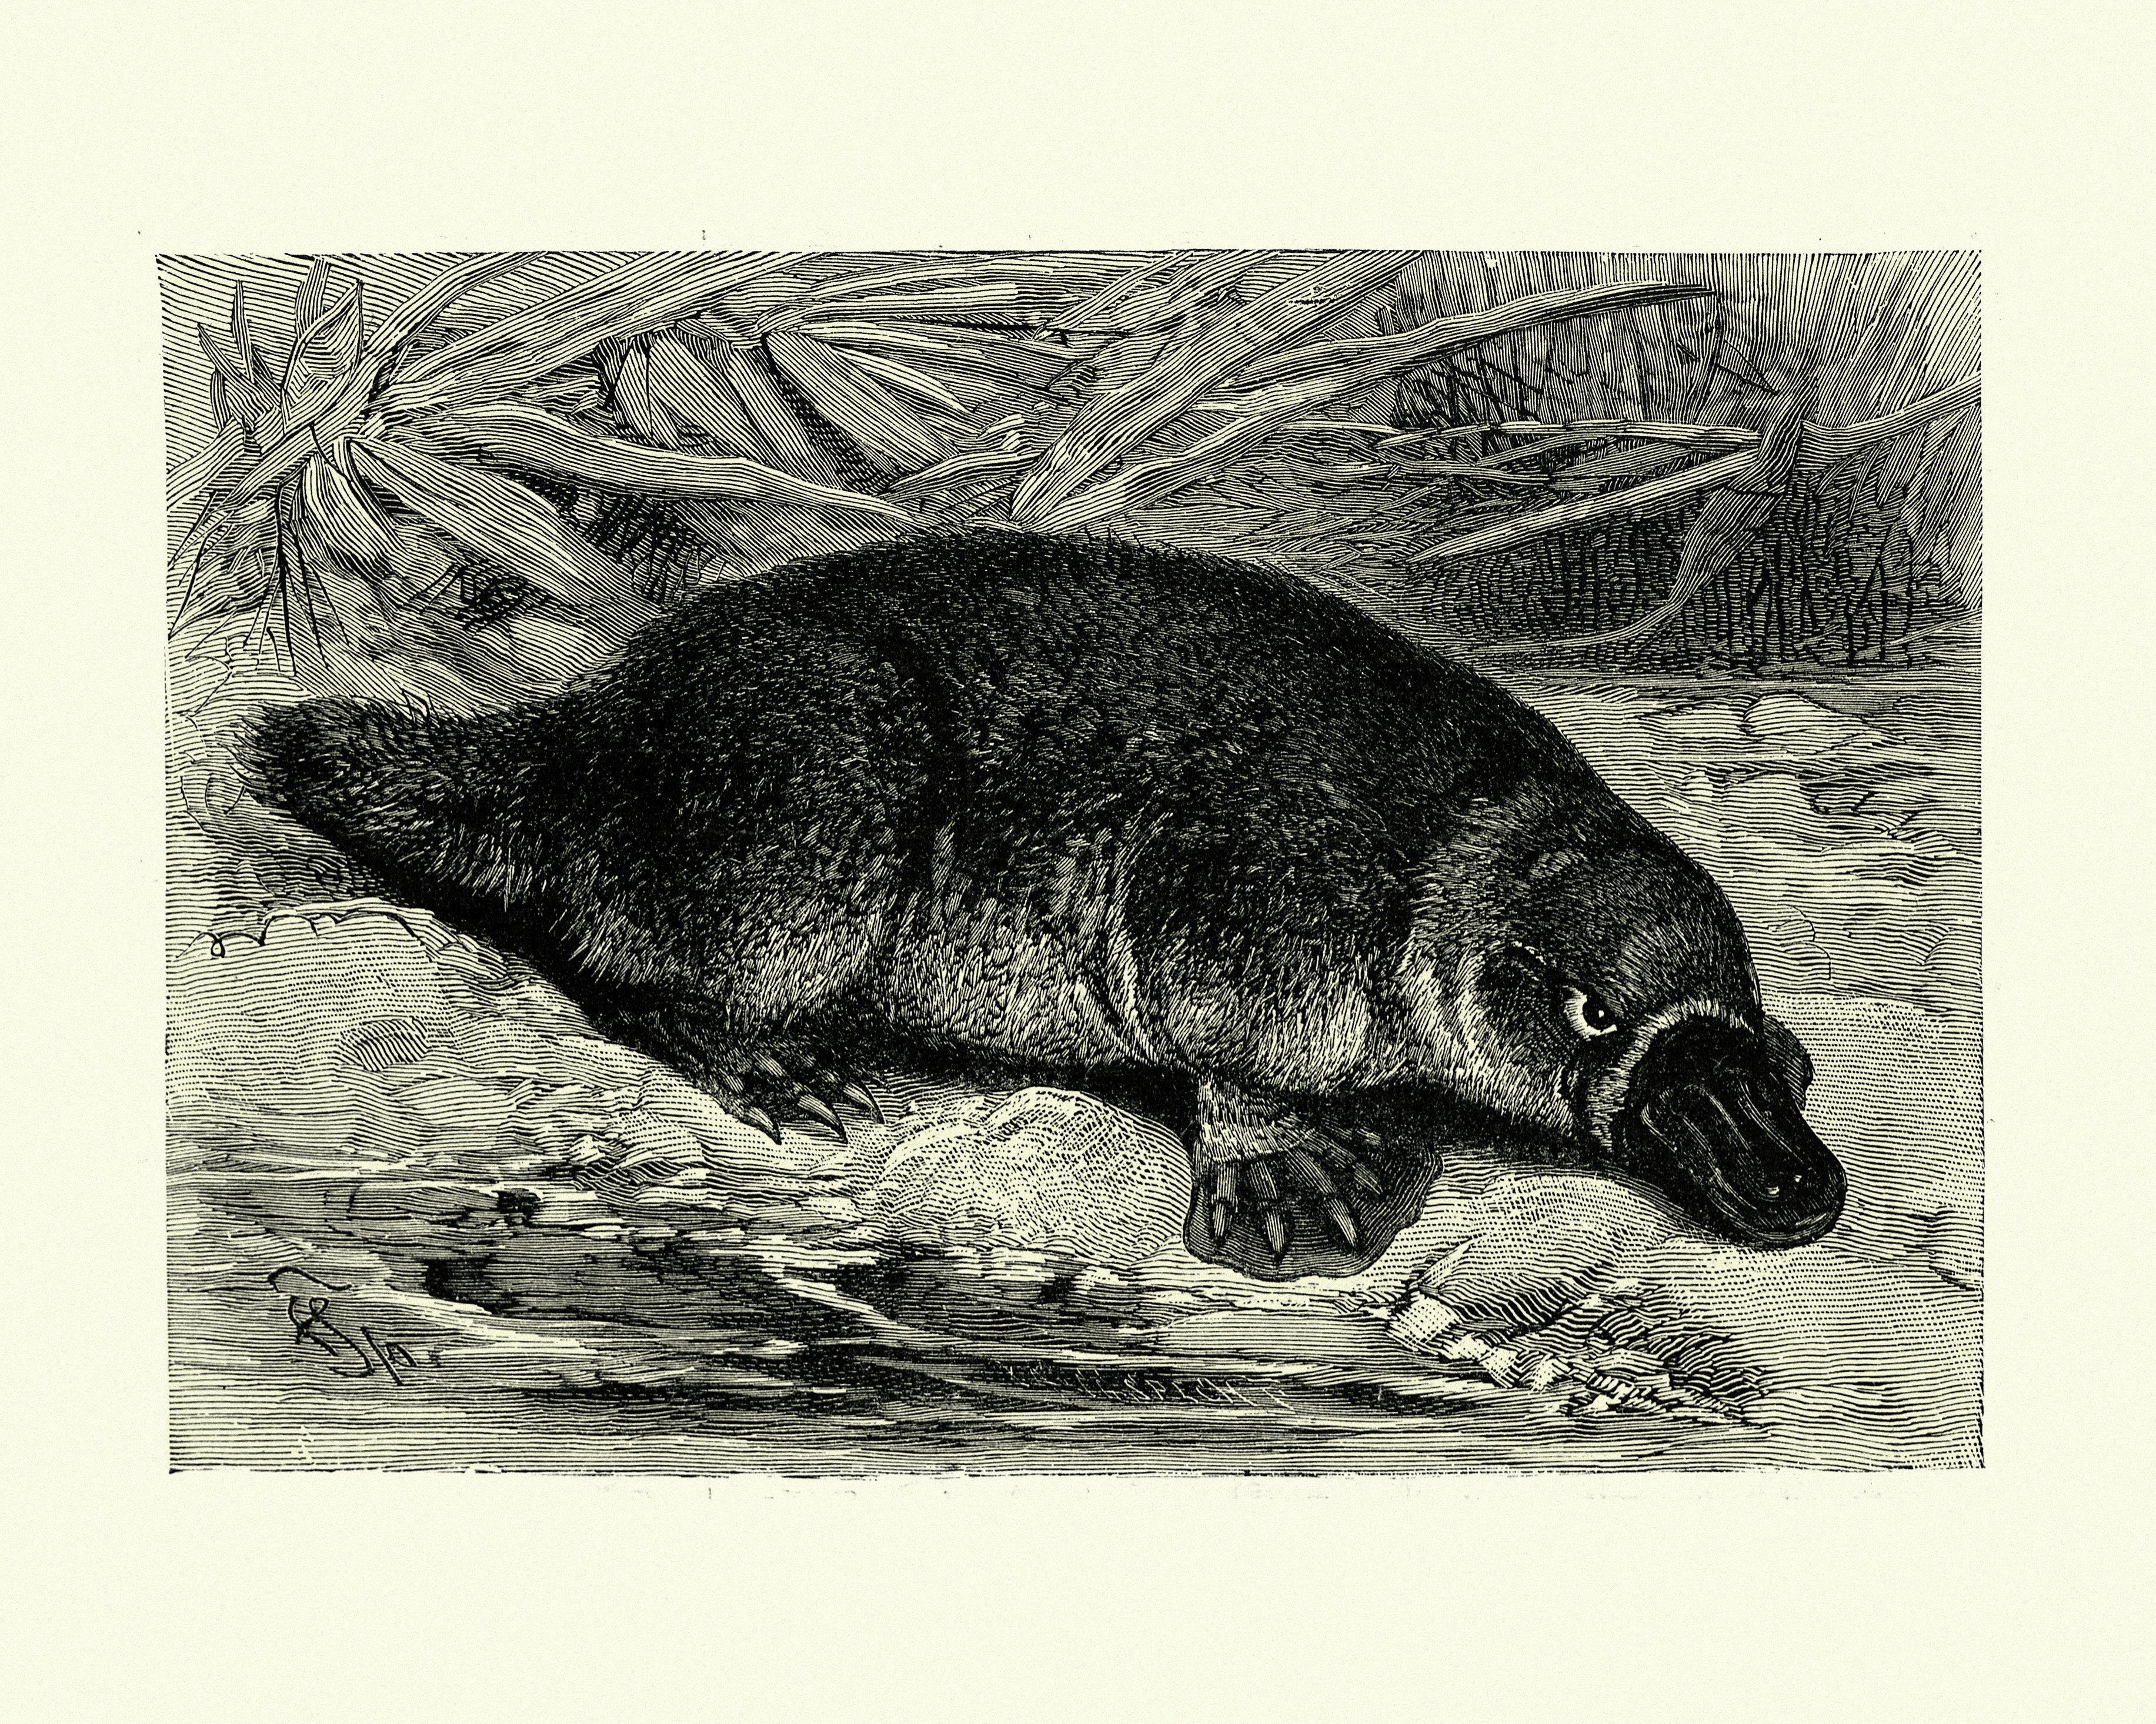 platypus lay eggs or not